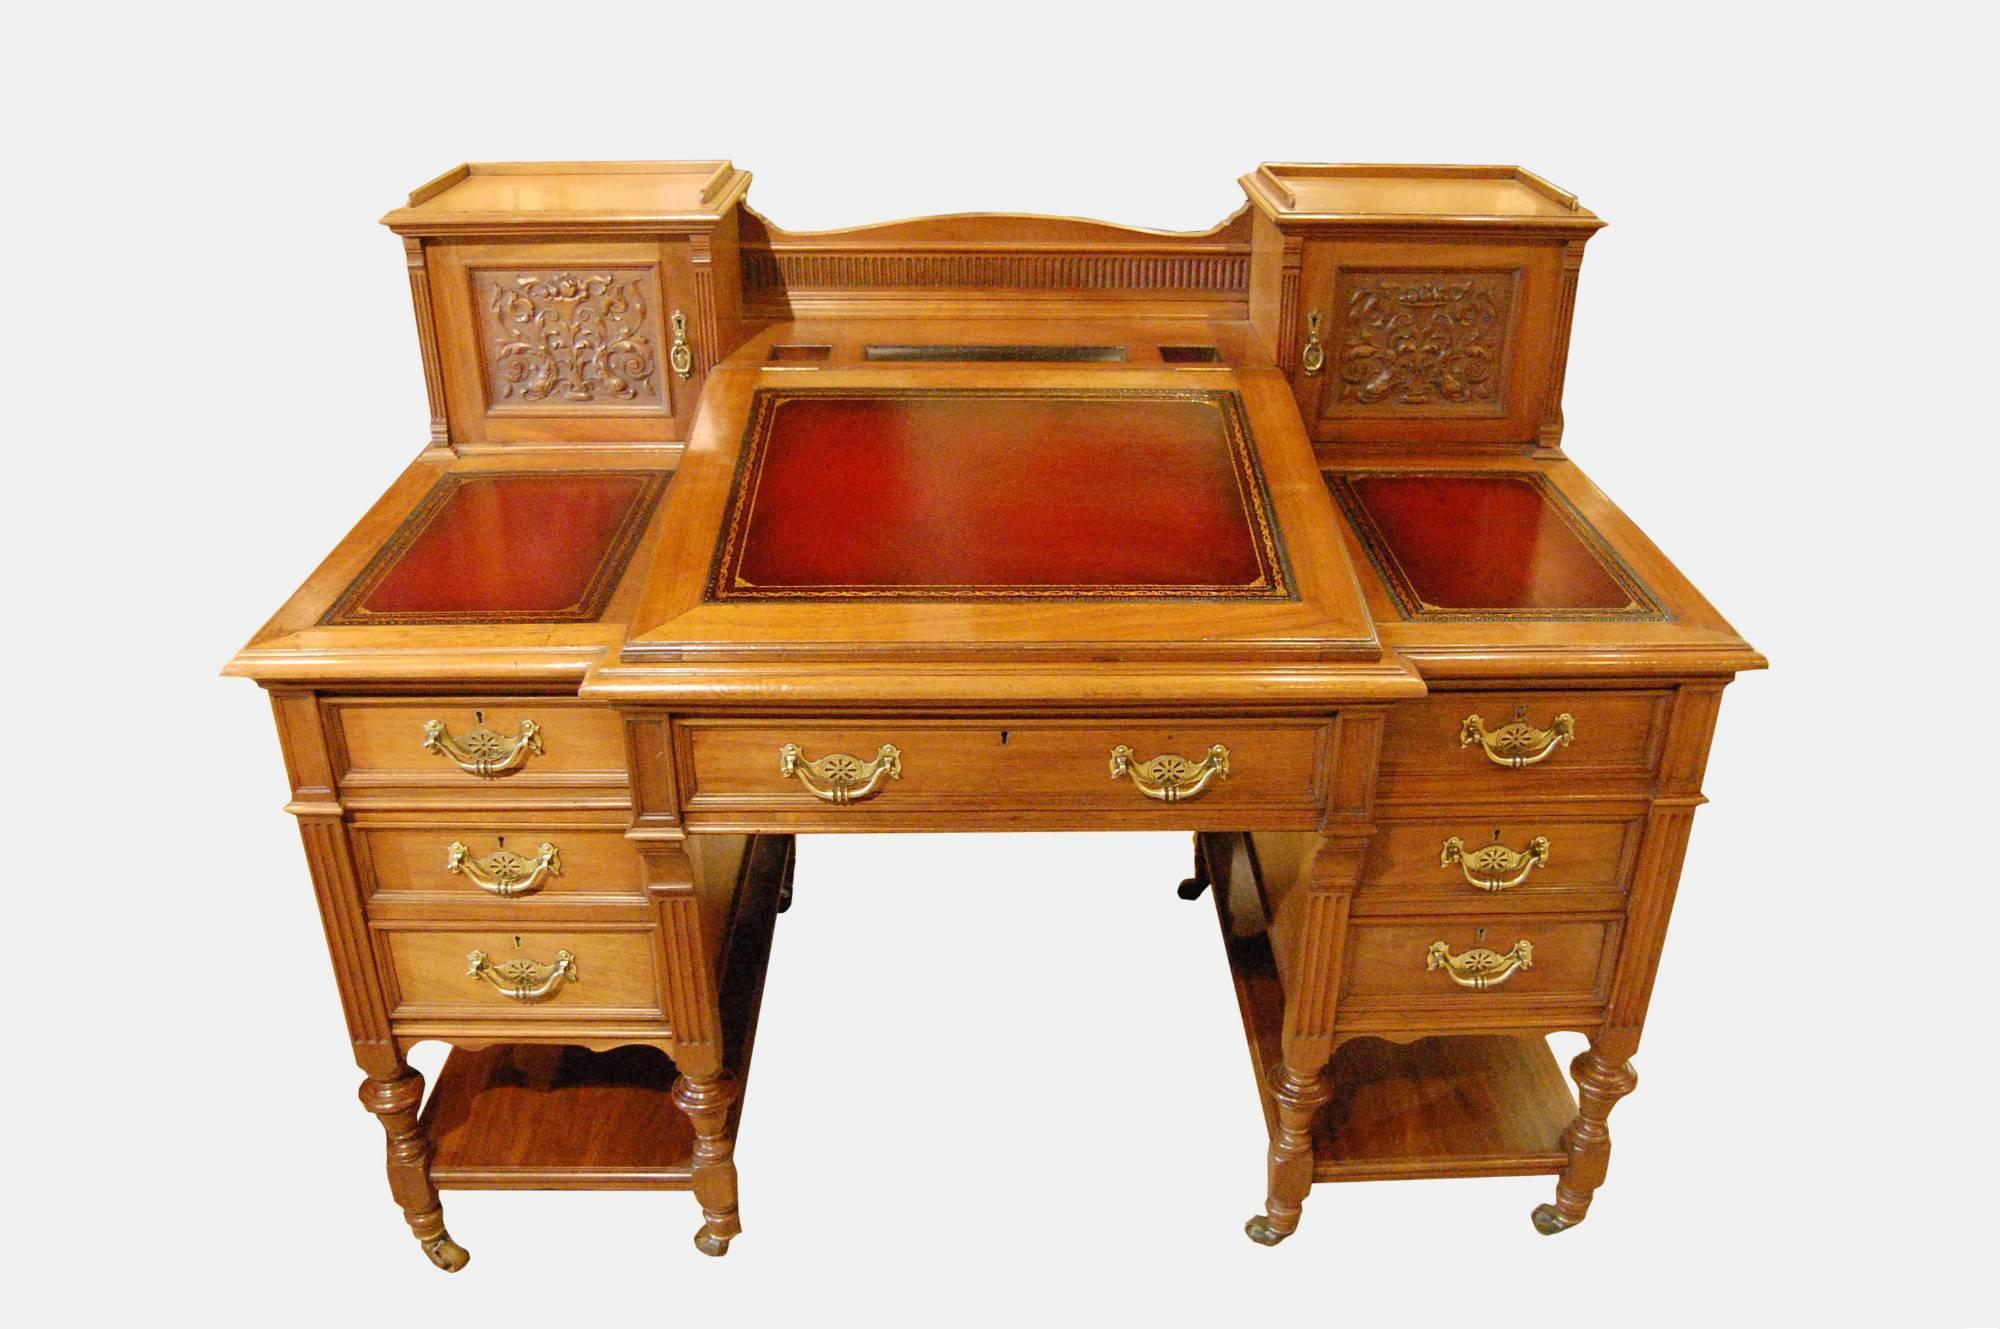 Branded with Maple & Co. This is a beautiful walnut register desk with several draws and cabinets, circa 1880.